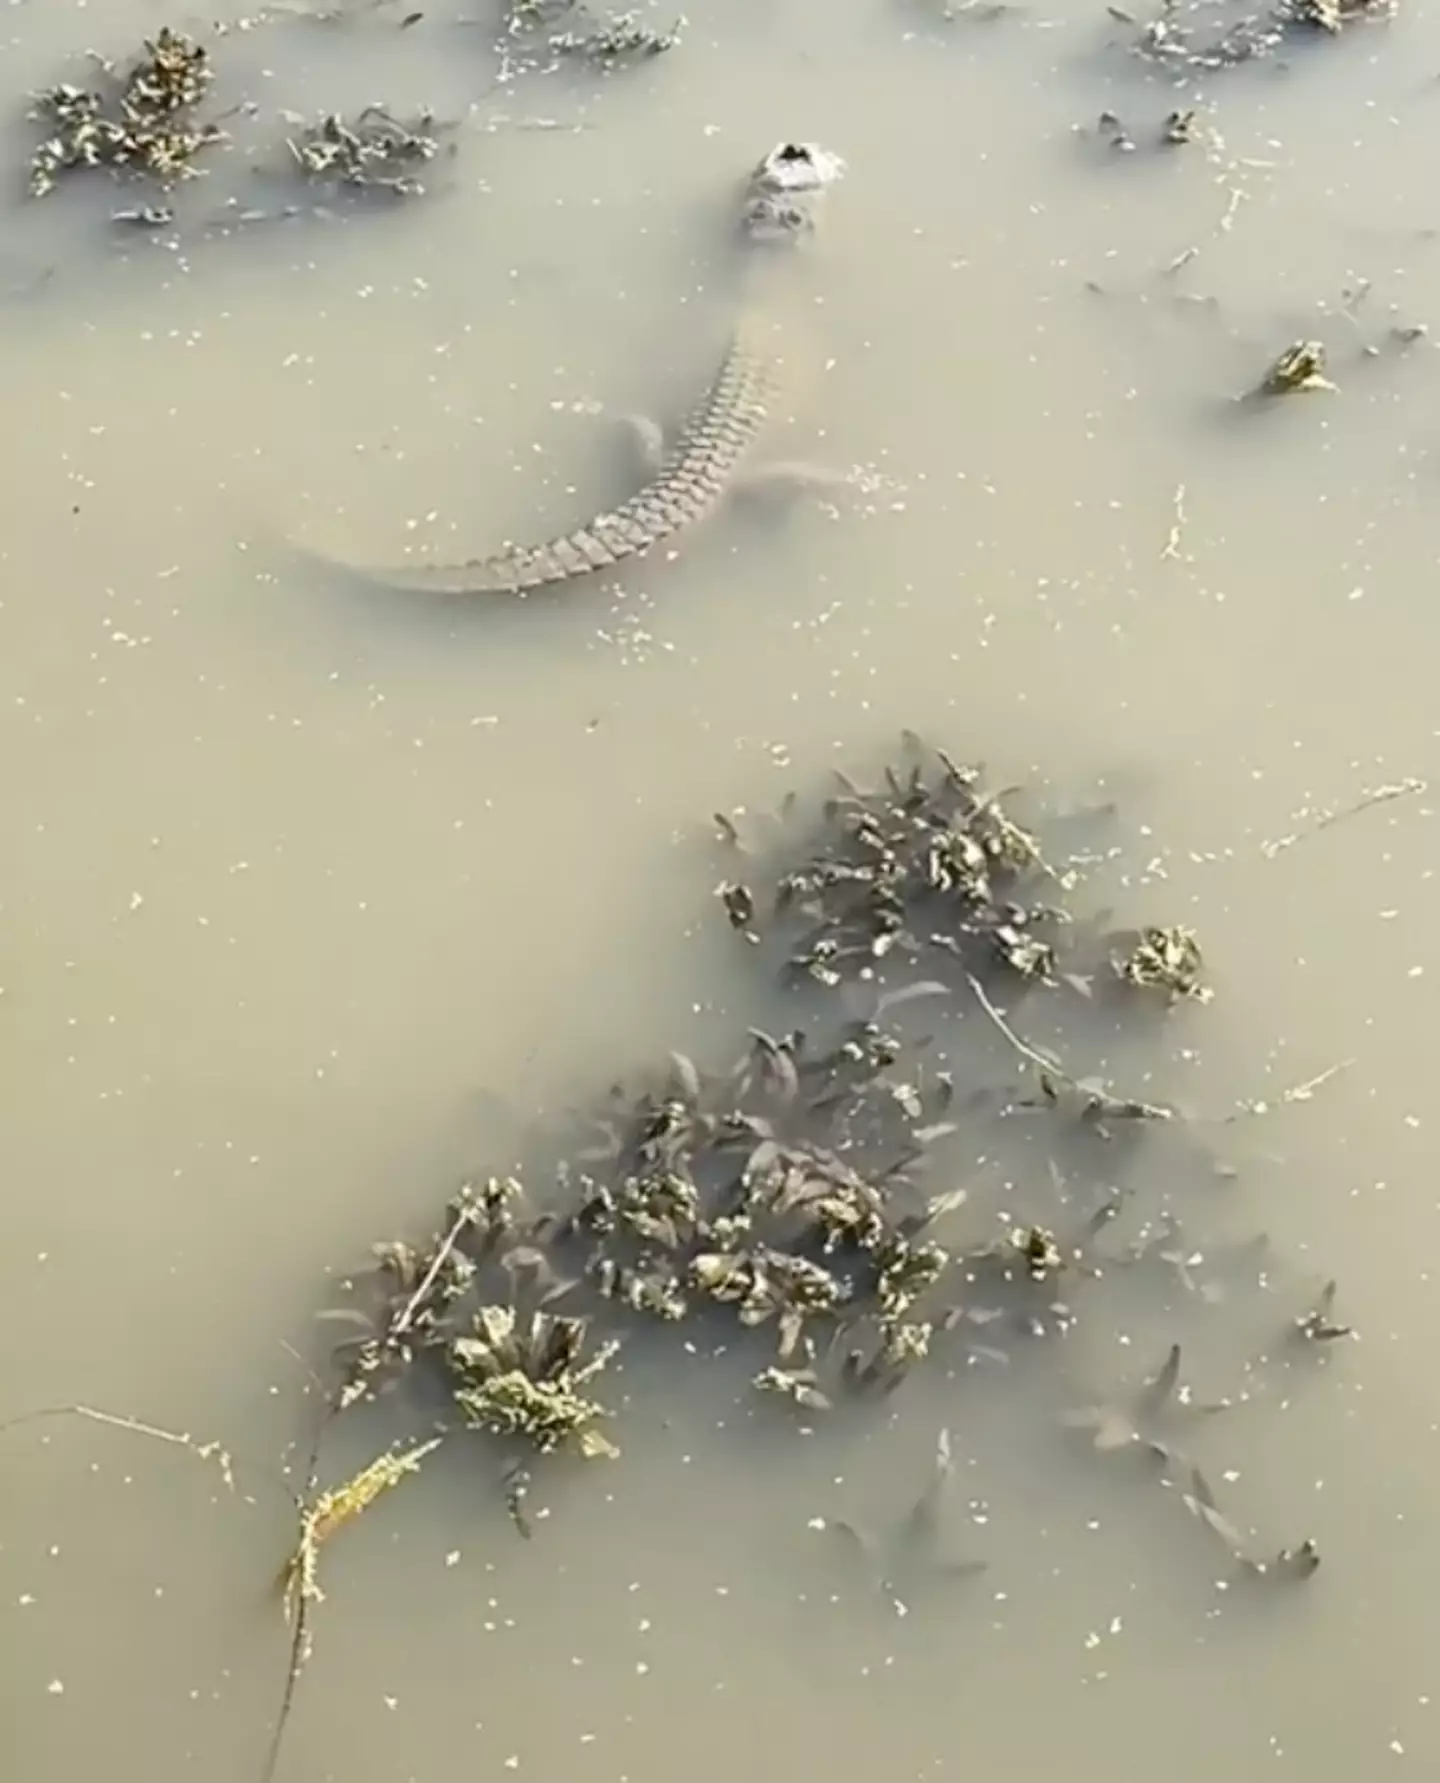 The video shows how alligators survive in frozen water.